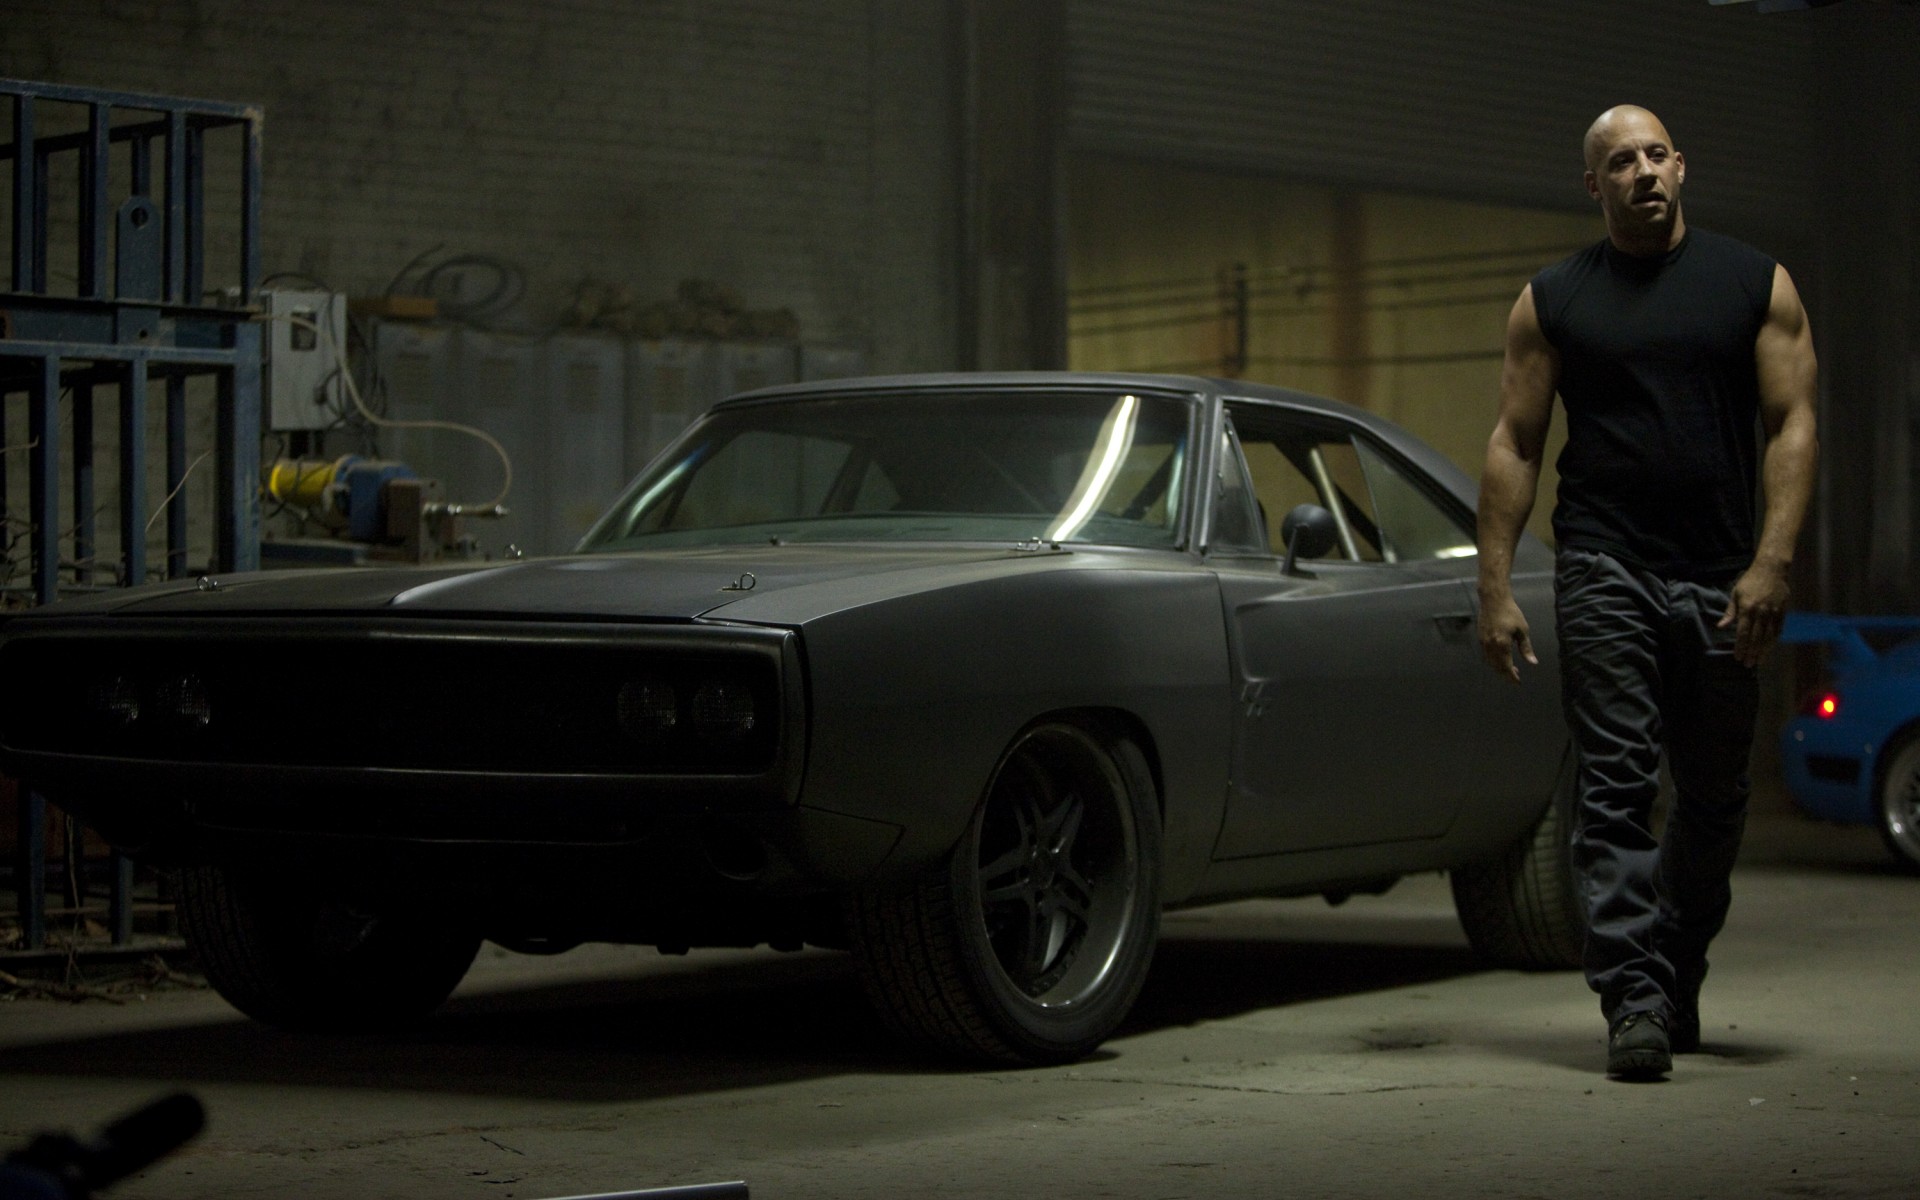 fast & furious, movie, fast five, dominic toretto, vin diesel